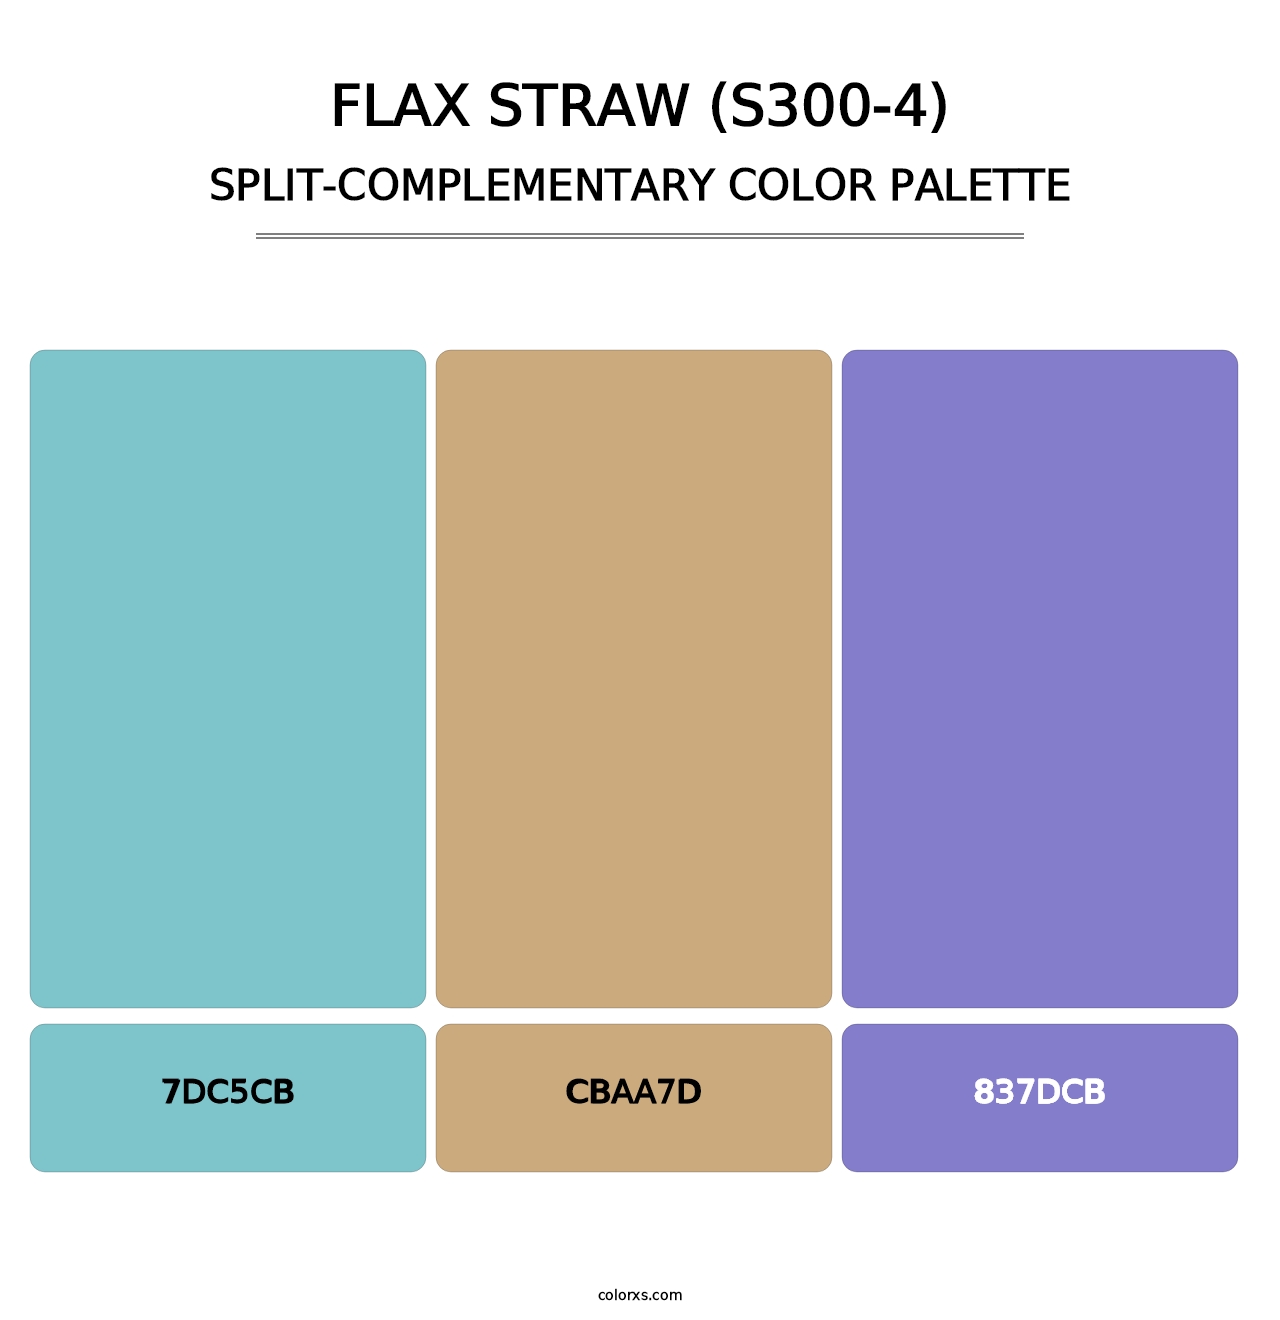 Flax Straw (S300-4) - Split-Complementary Color Palette